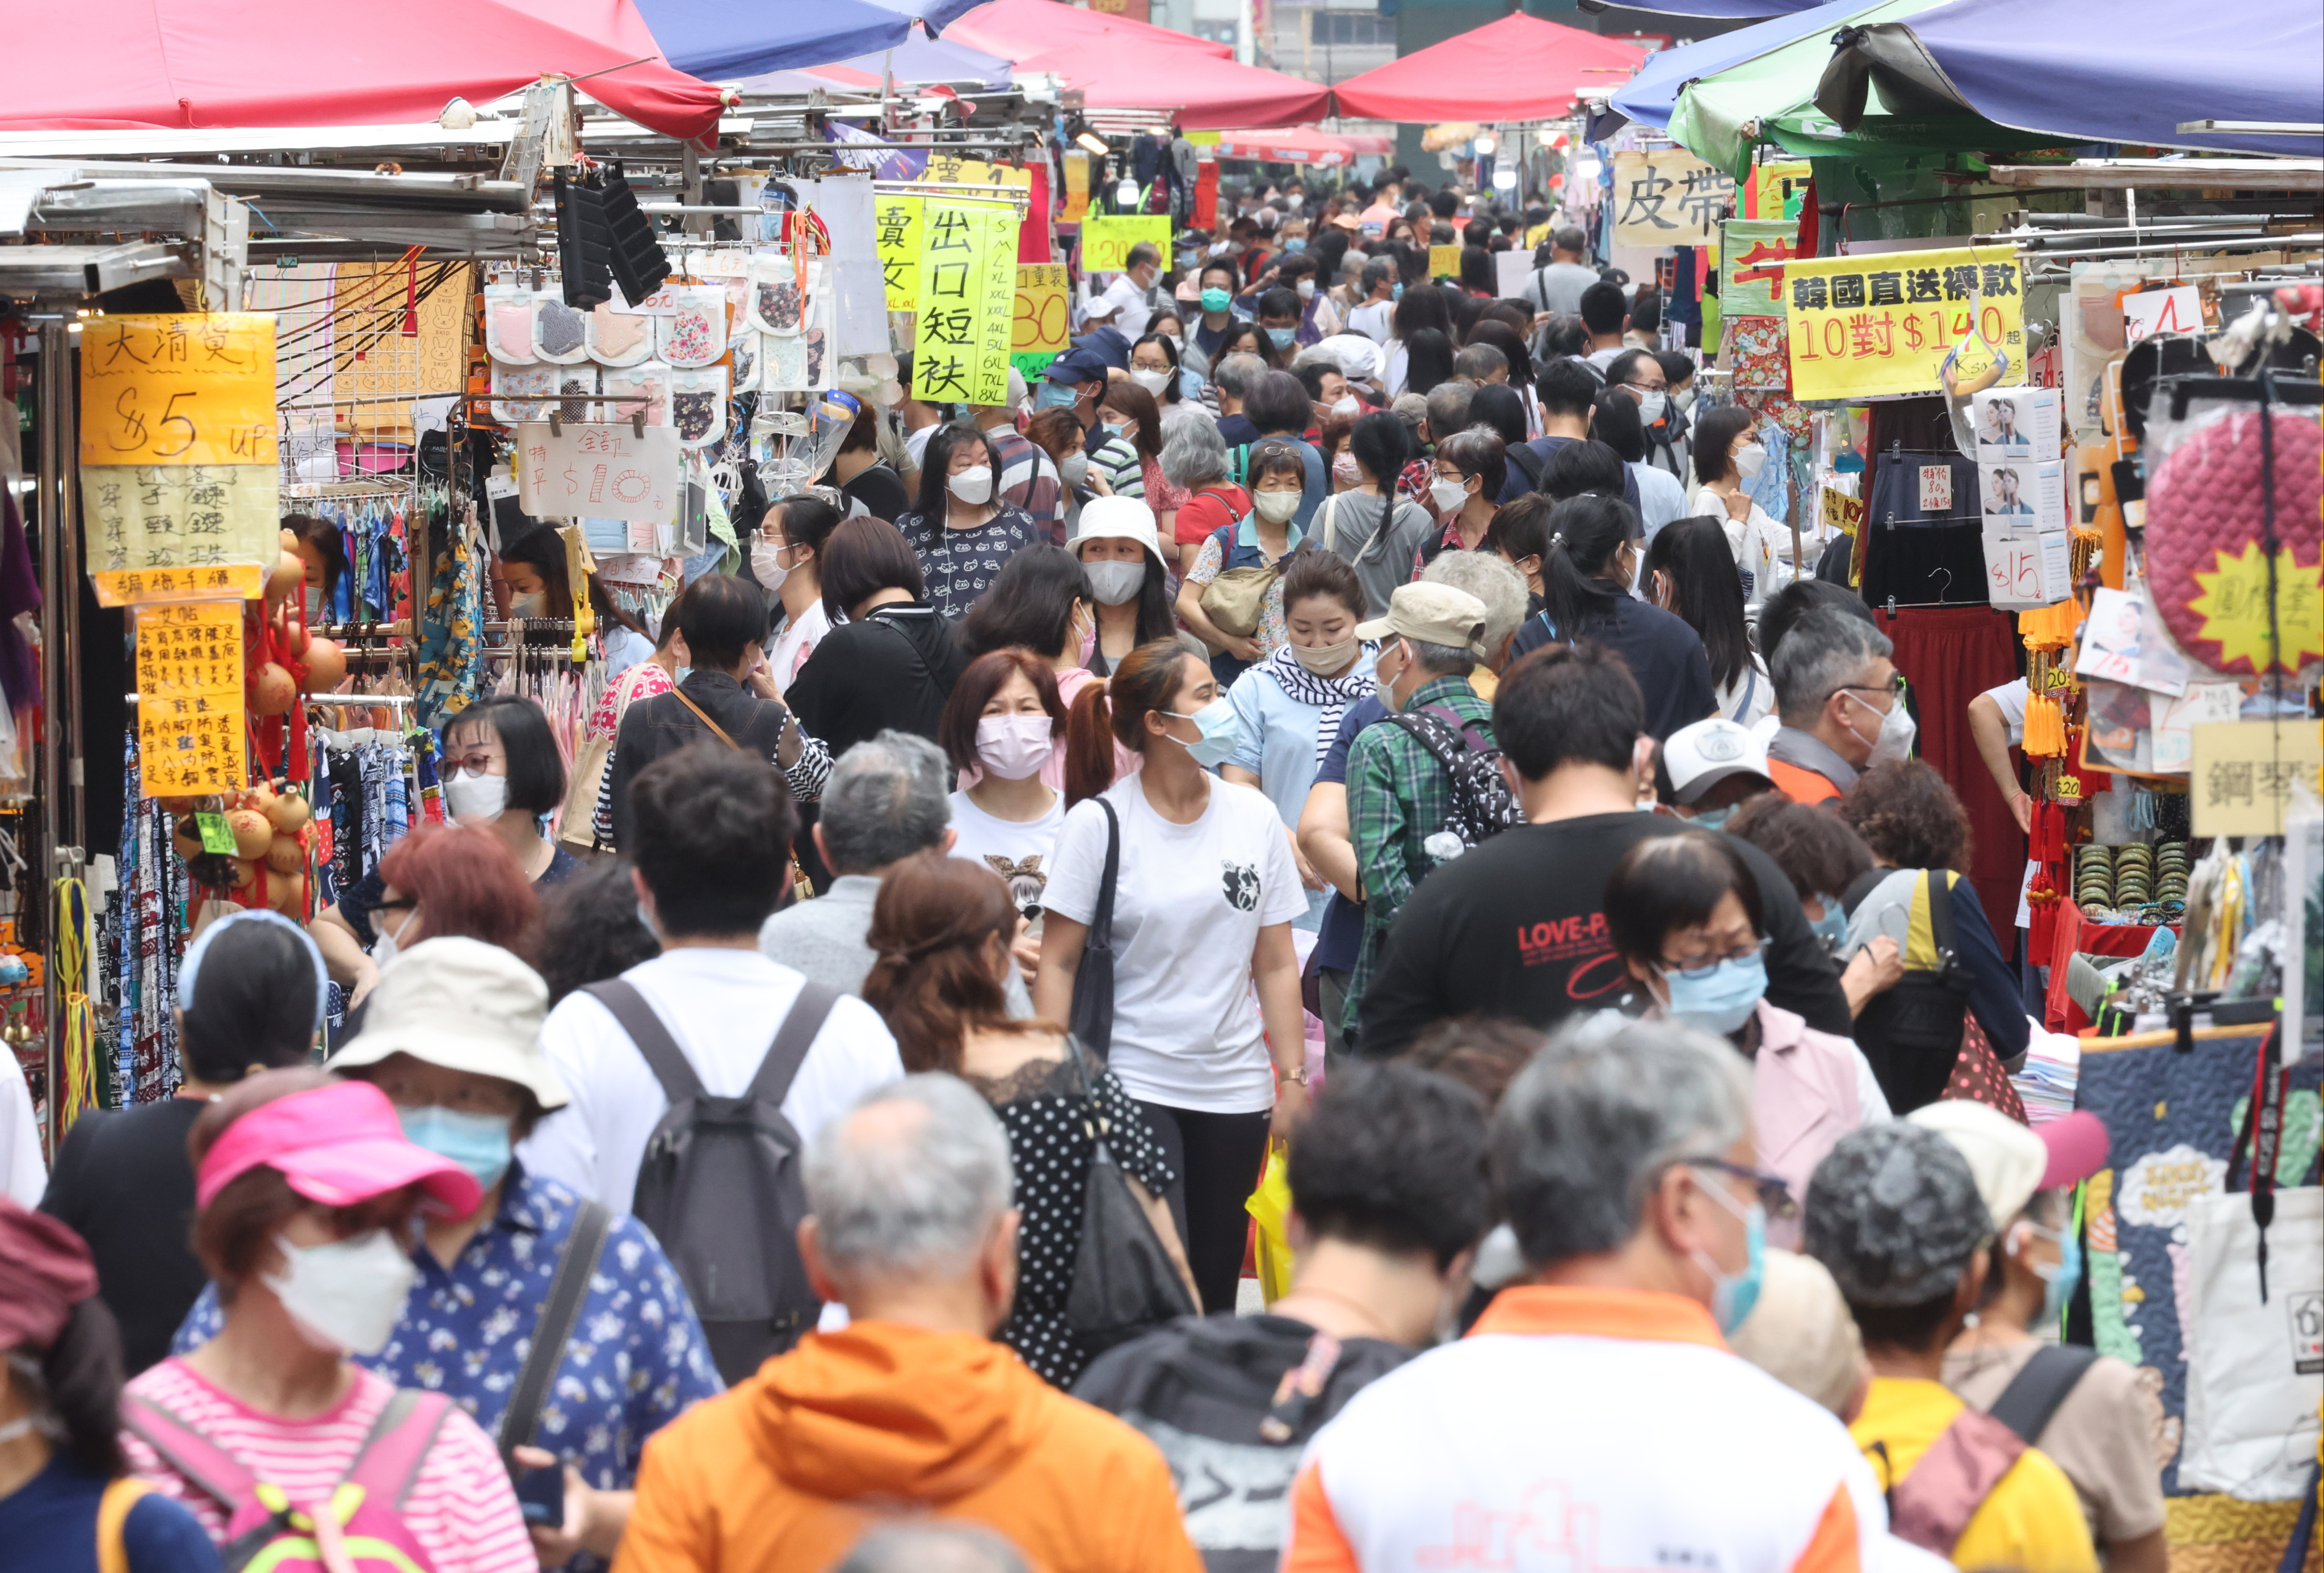 People visit a street market in Mong Kok on April 22, a day after some social distancing rules are eased. Photo: Edmond So 